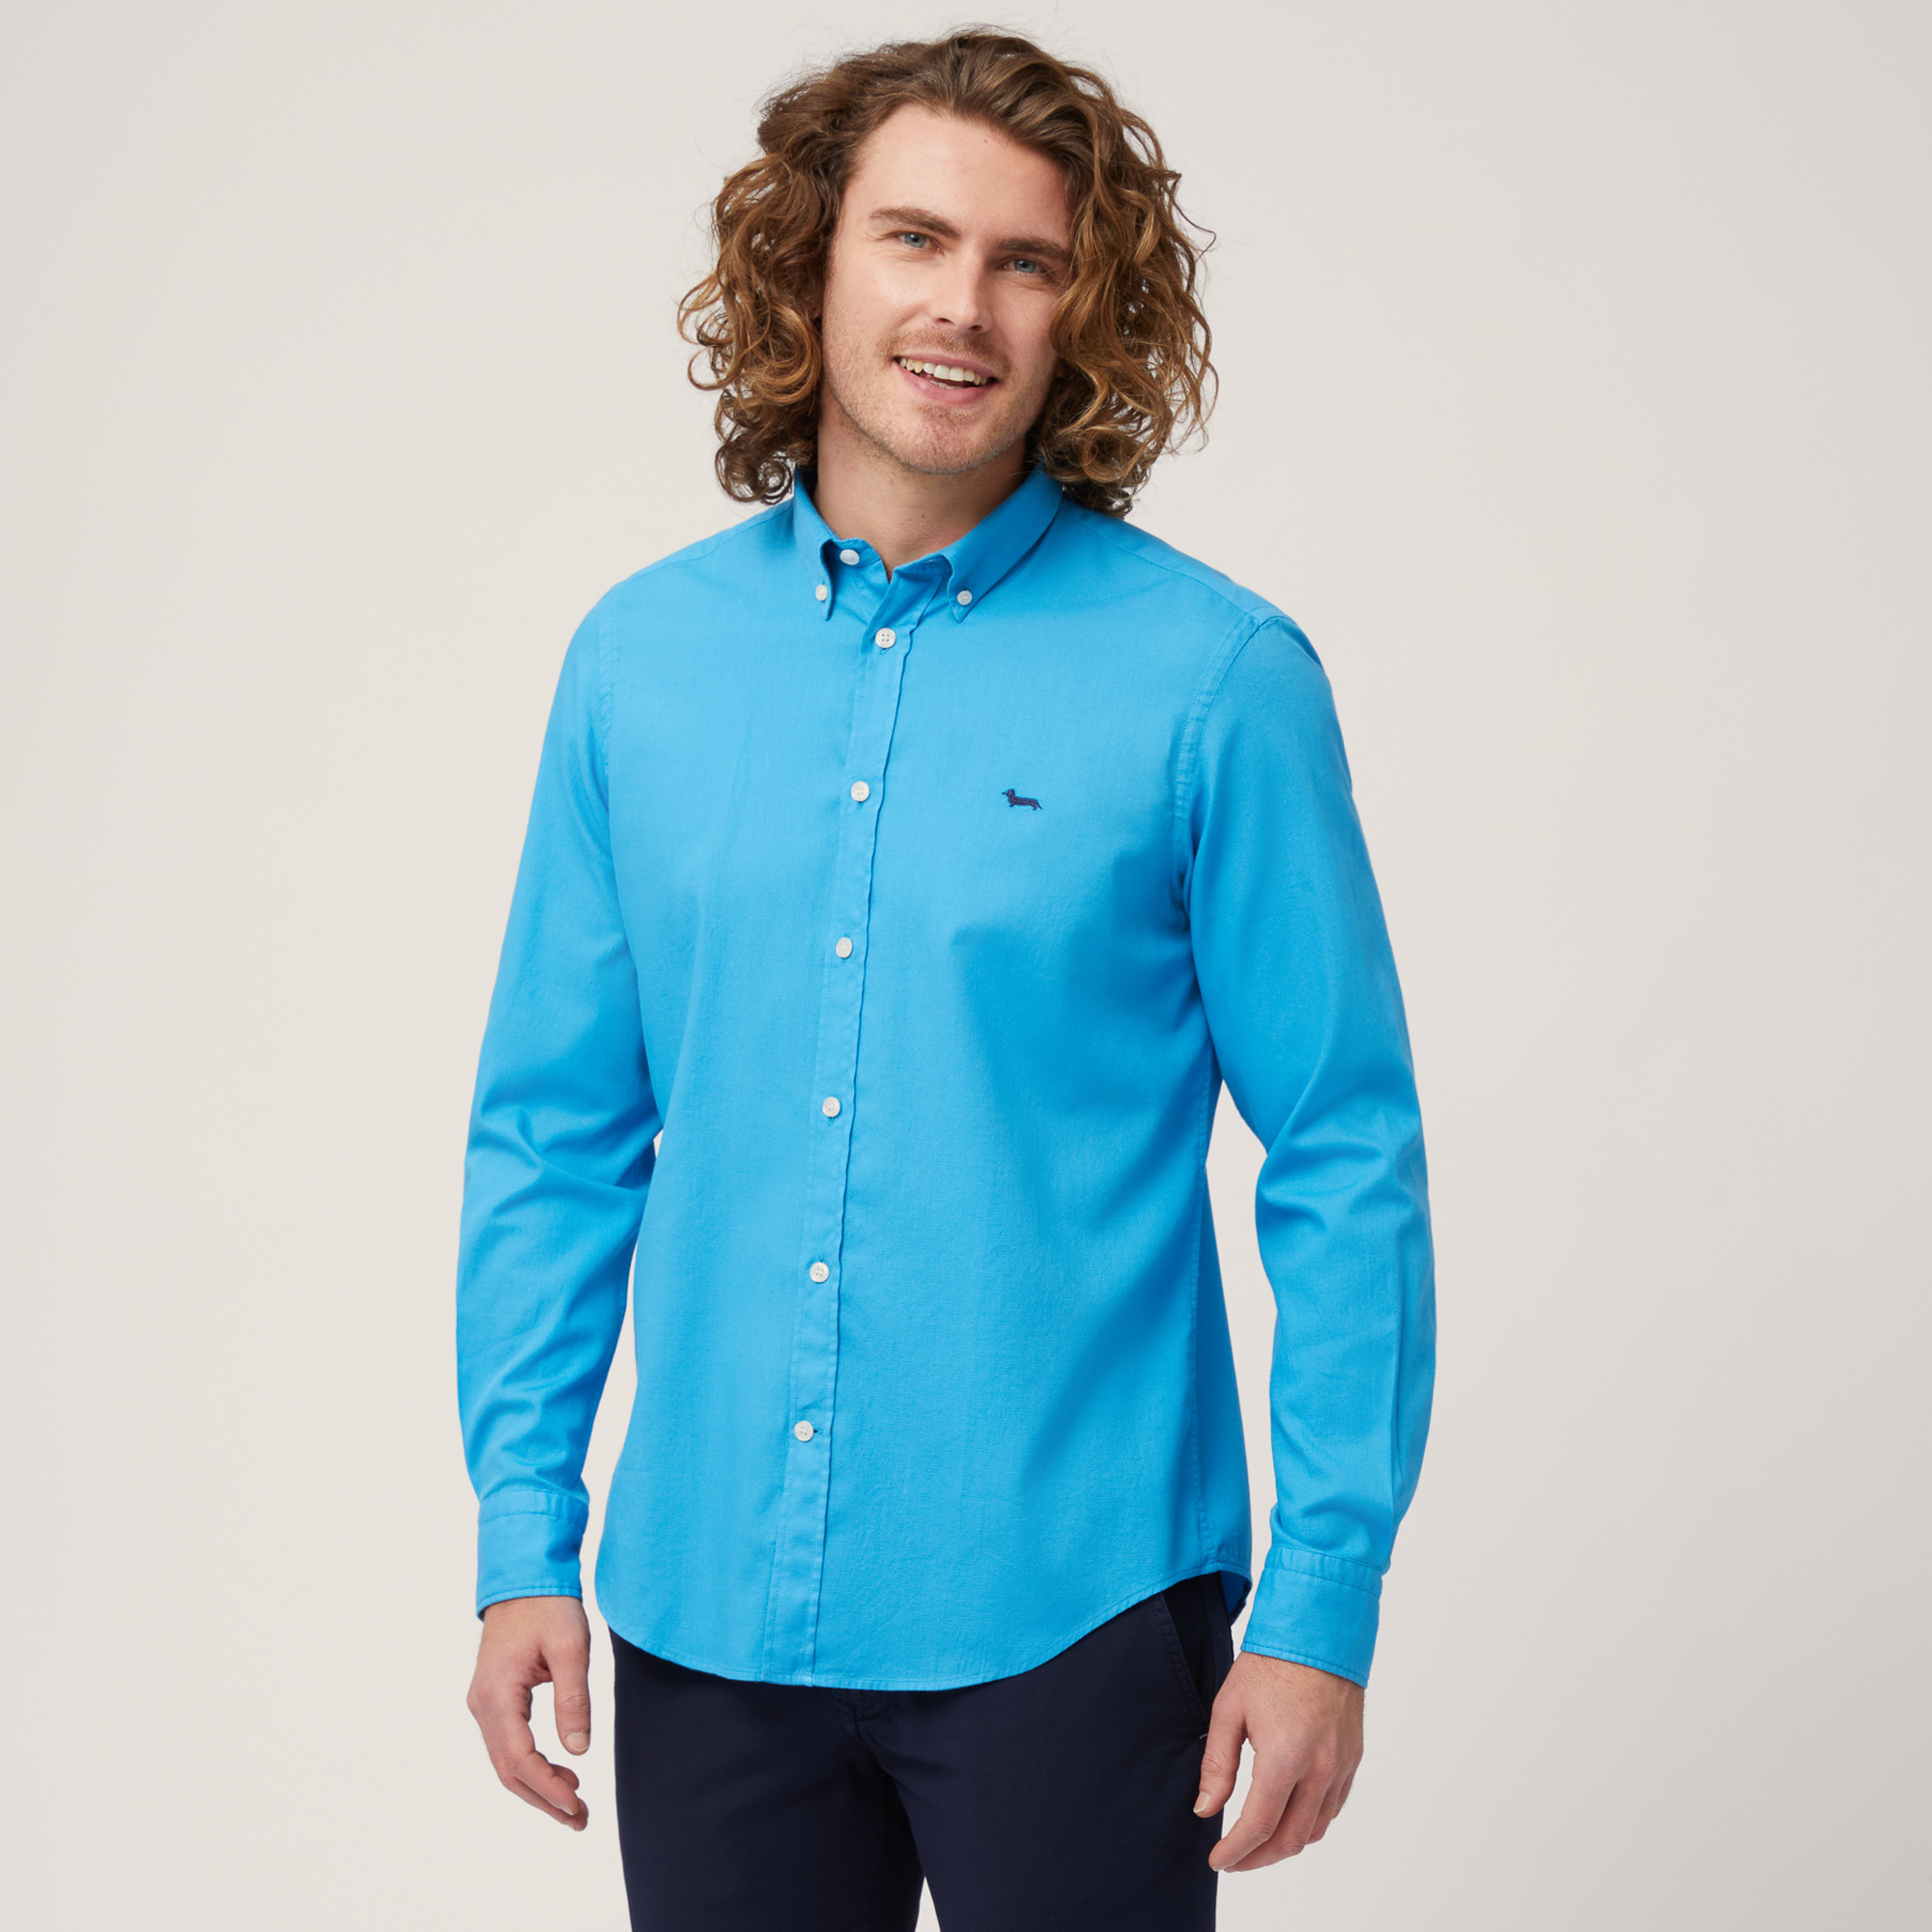 Cotton Shirt with Contrasting Inner Detail, Light Blue, large